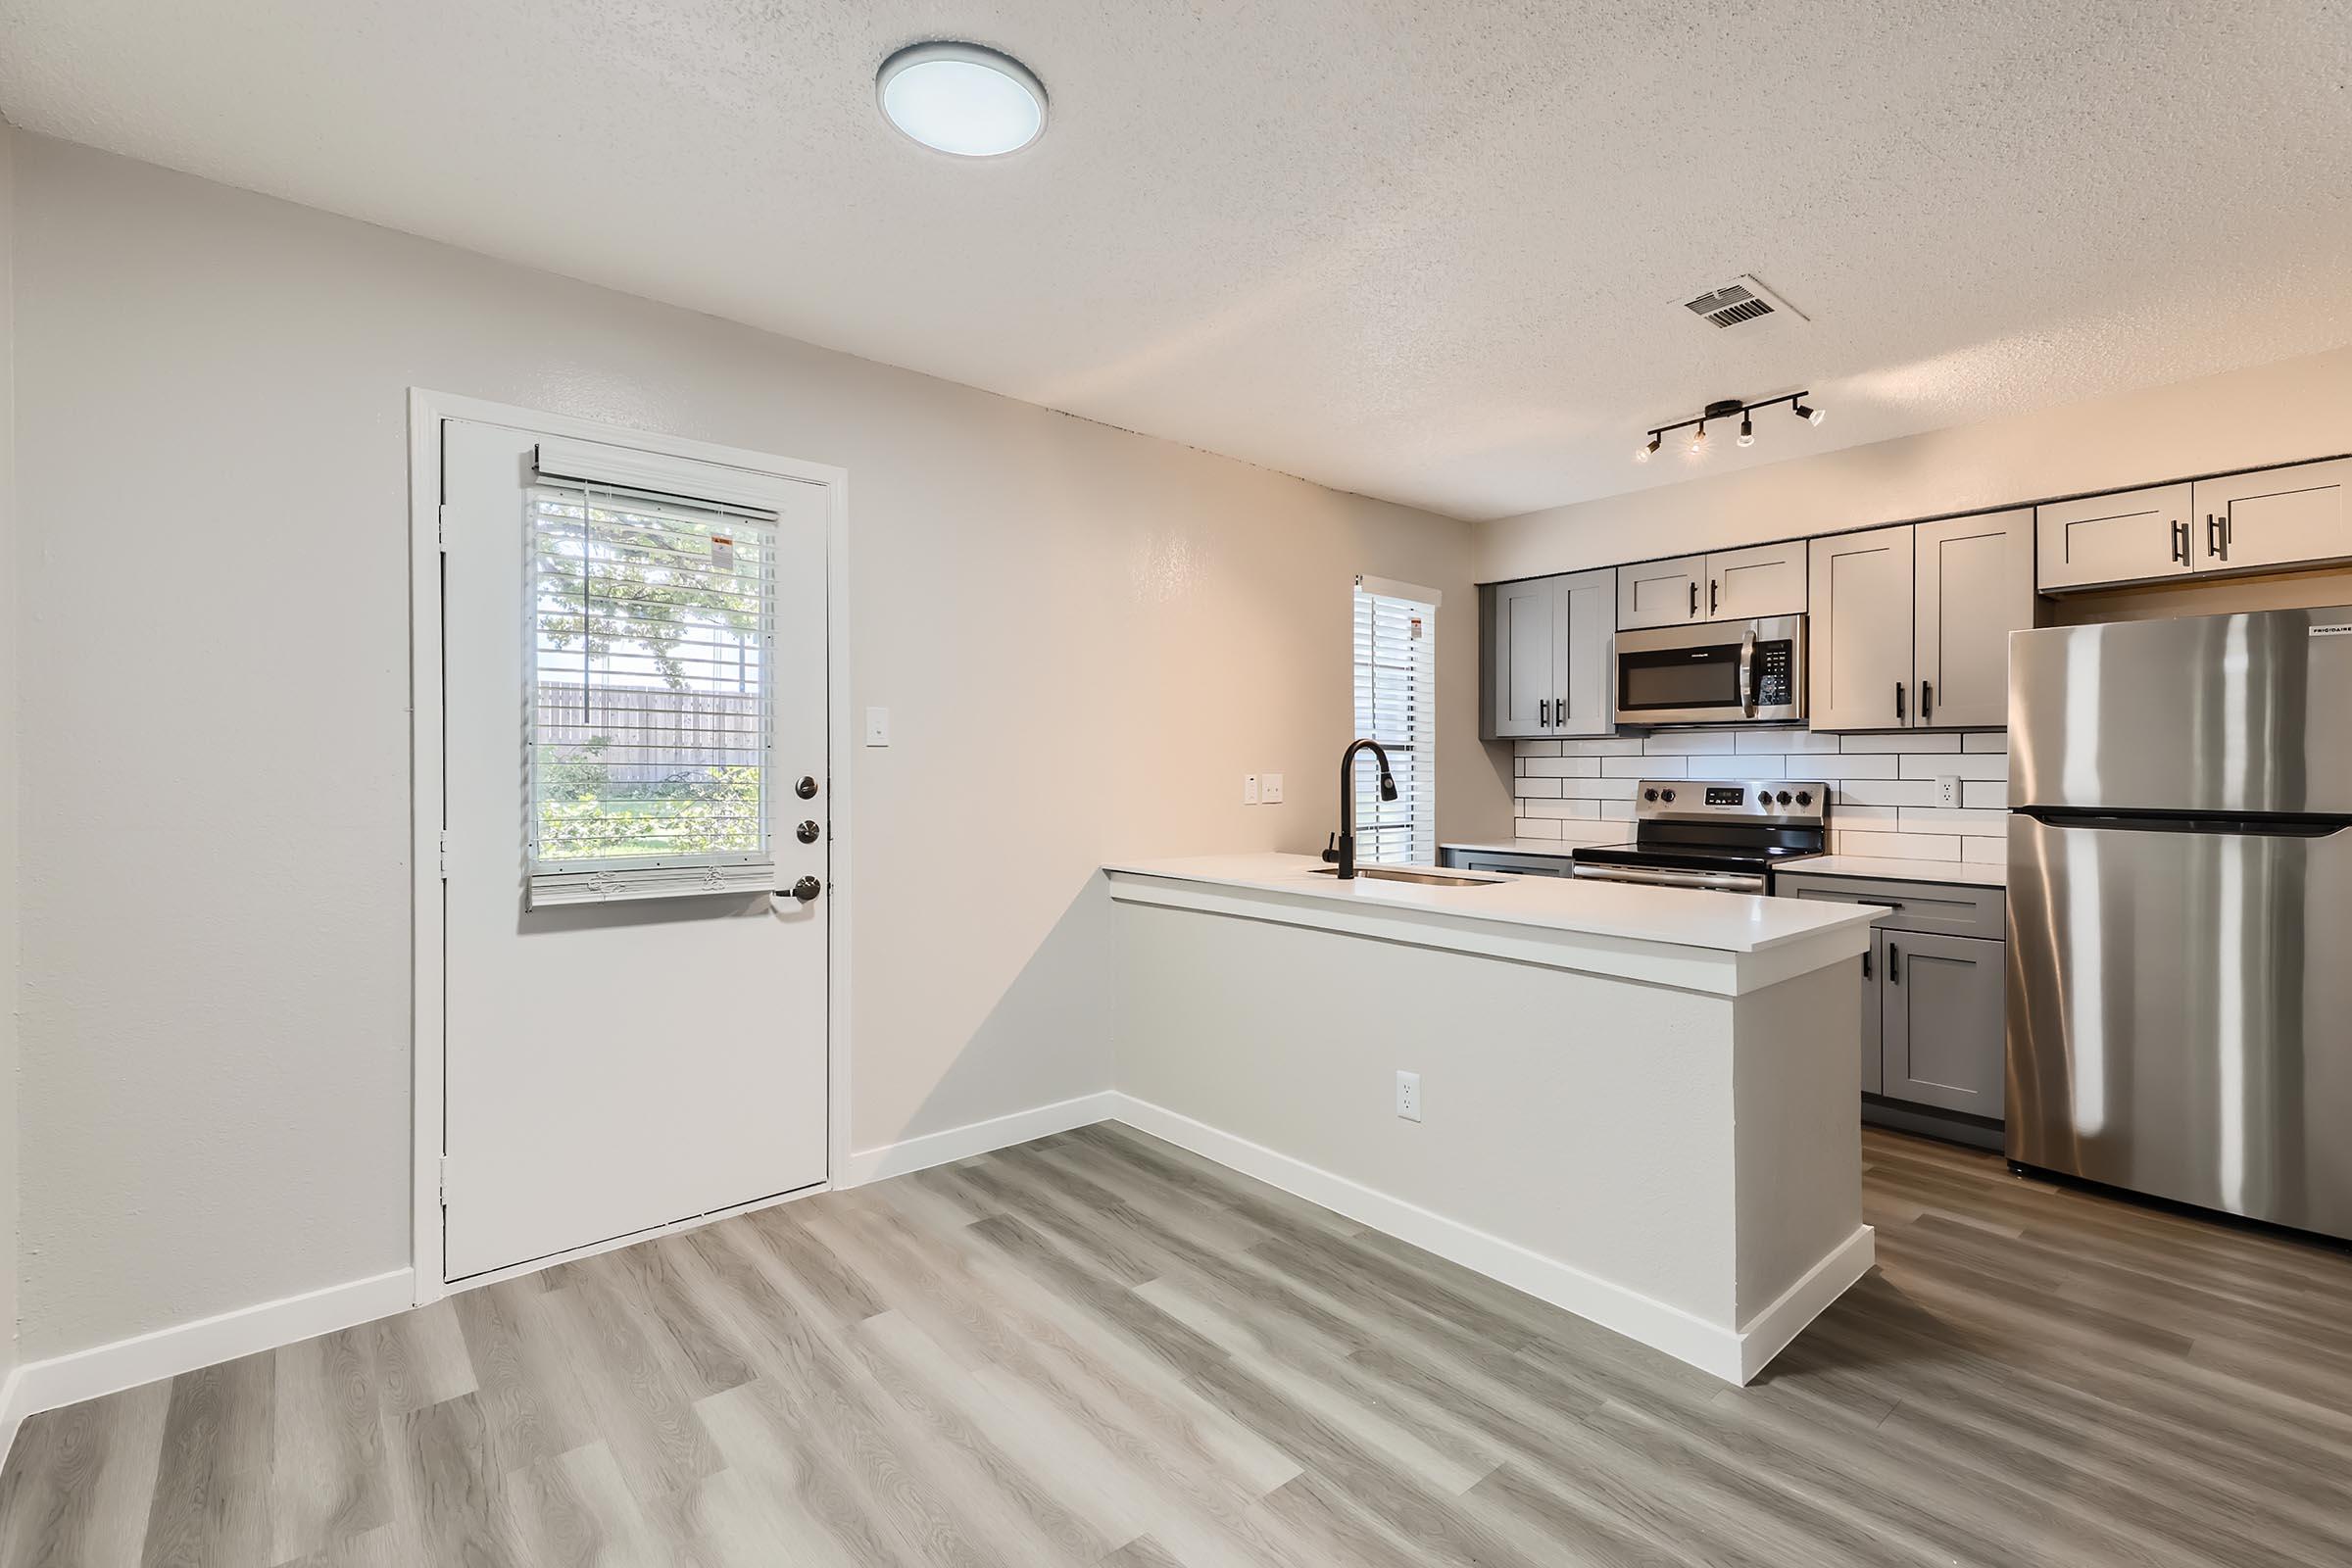 A kitchen and dining space with wood-style flooring at Rise Oak Creek